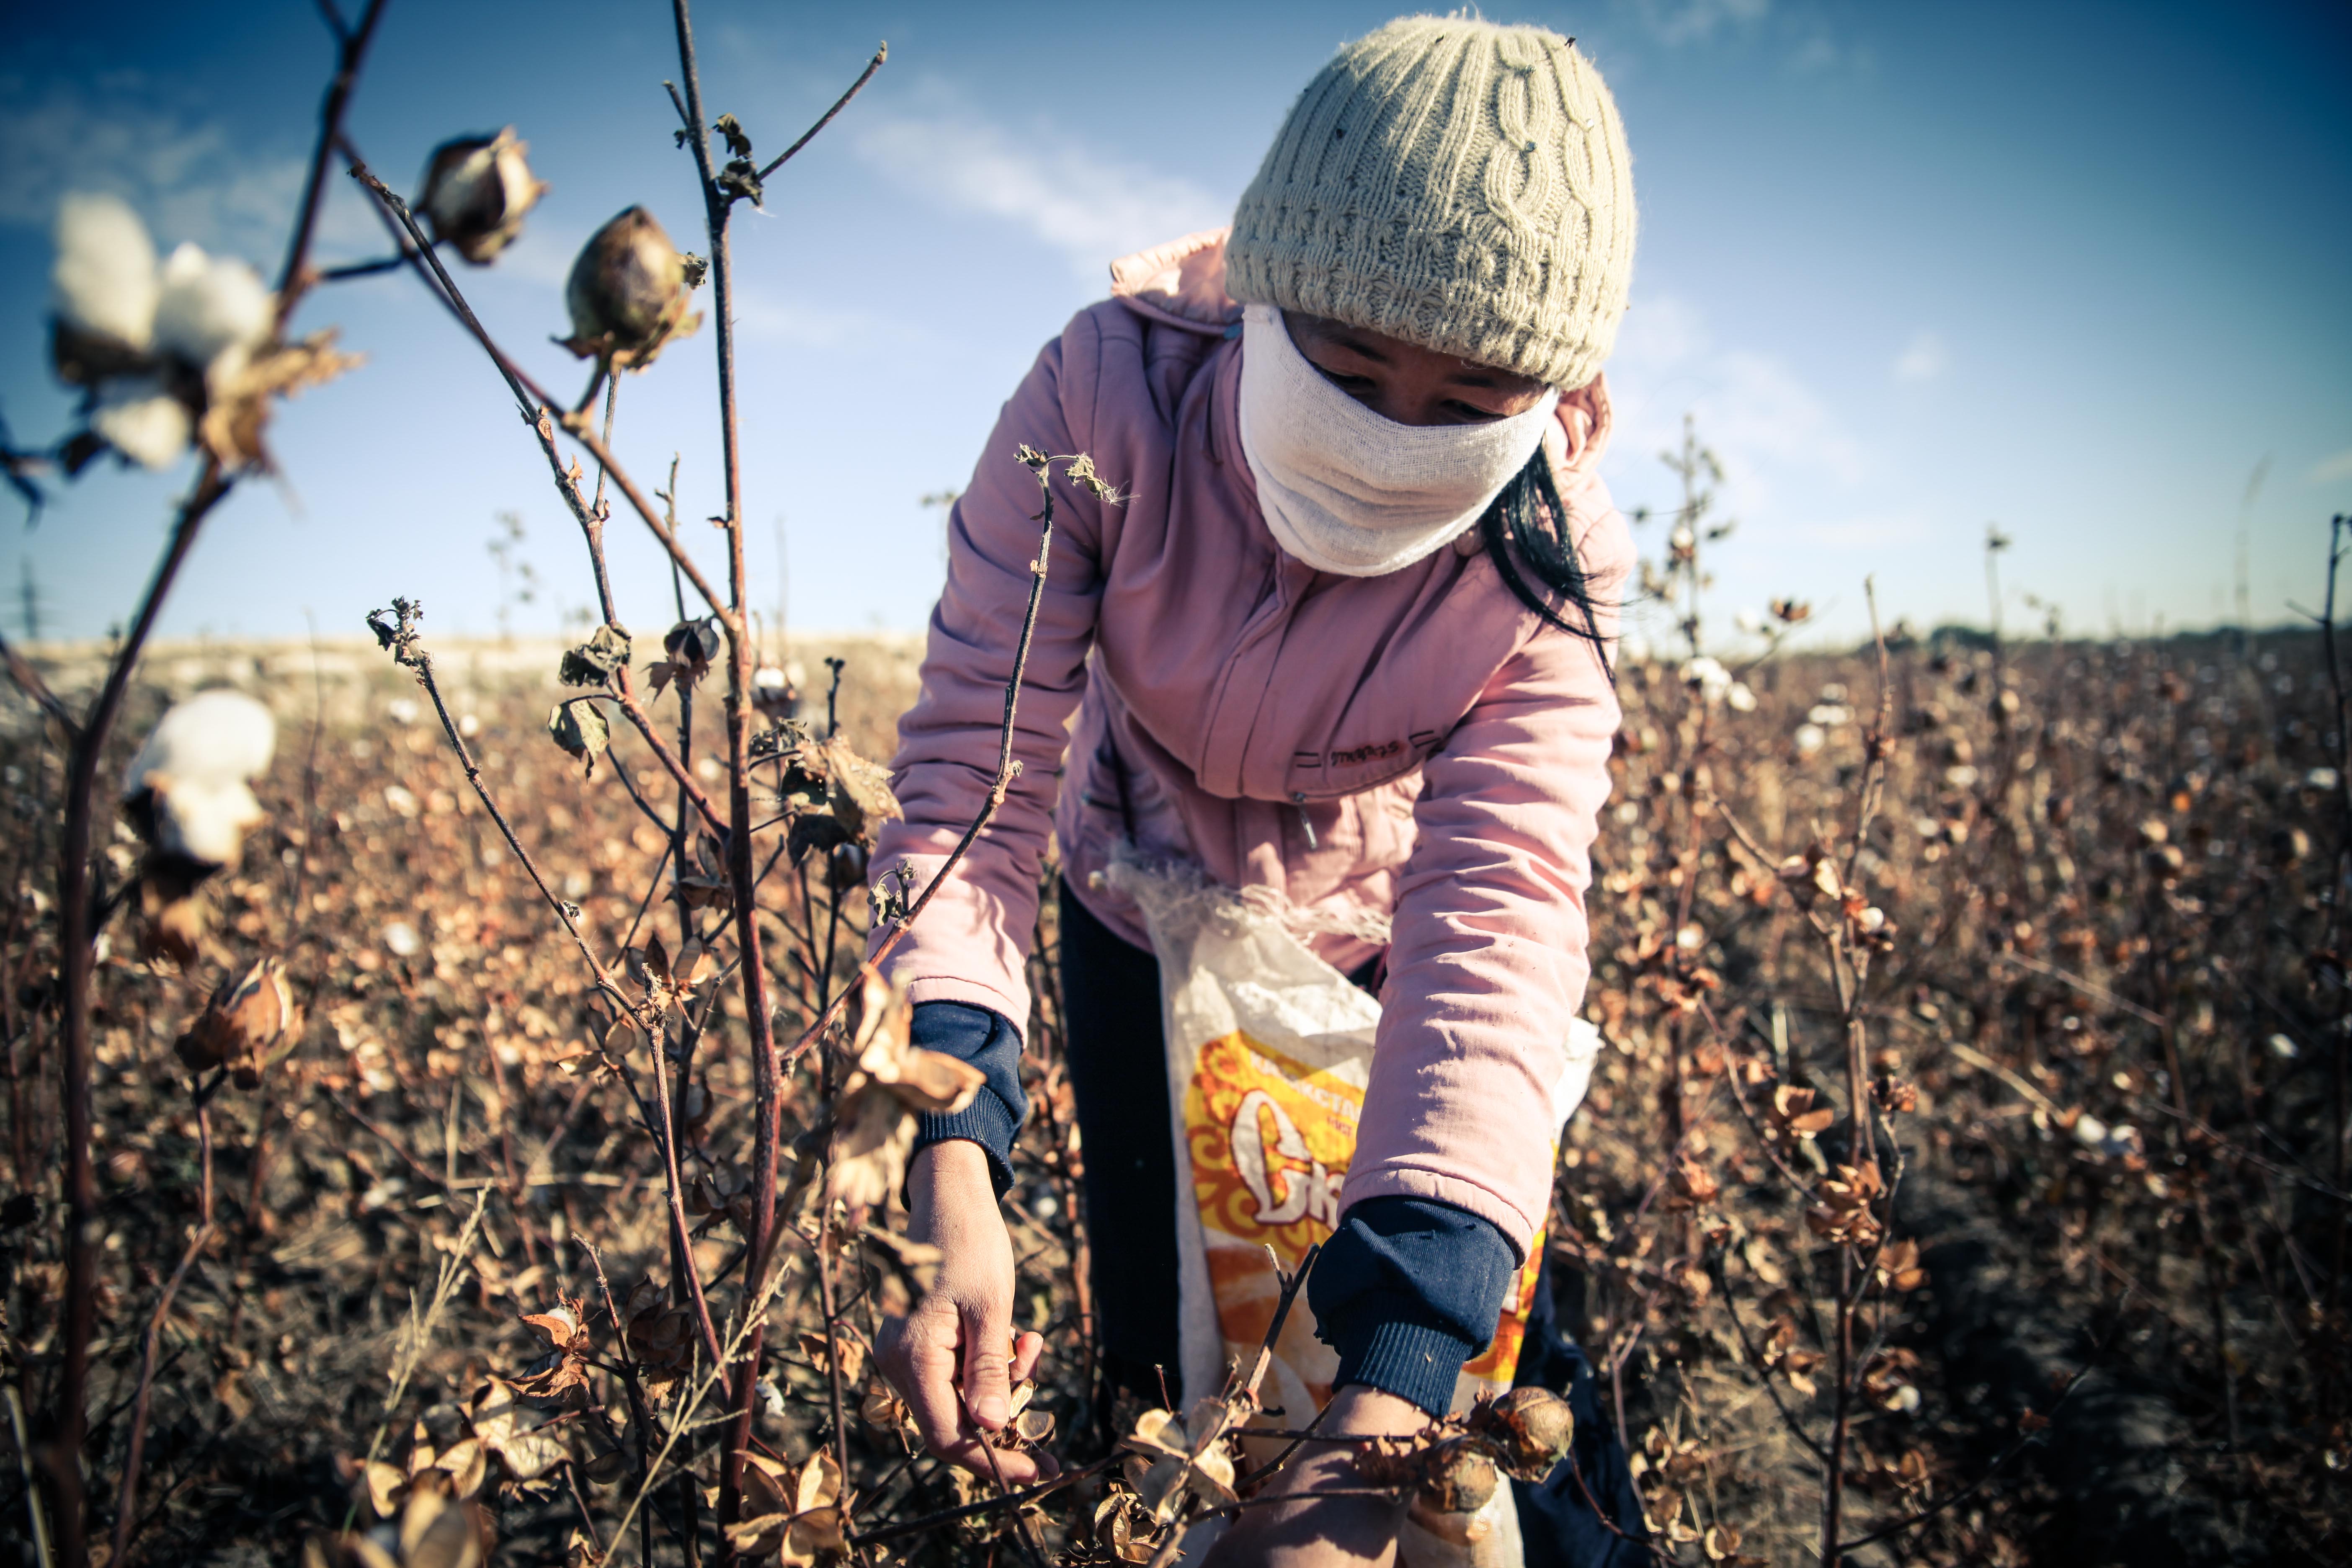 NEW REPORT RELEASED: Forced Labor Linked to World Bank